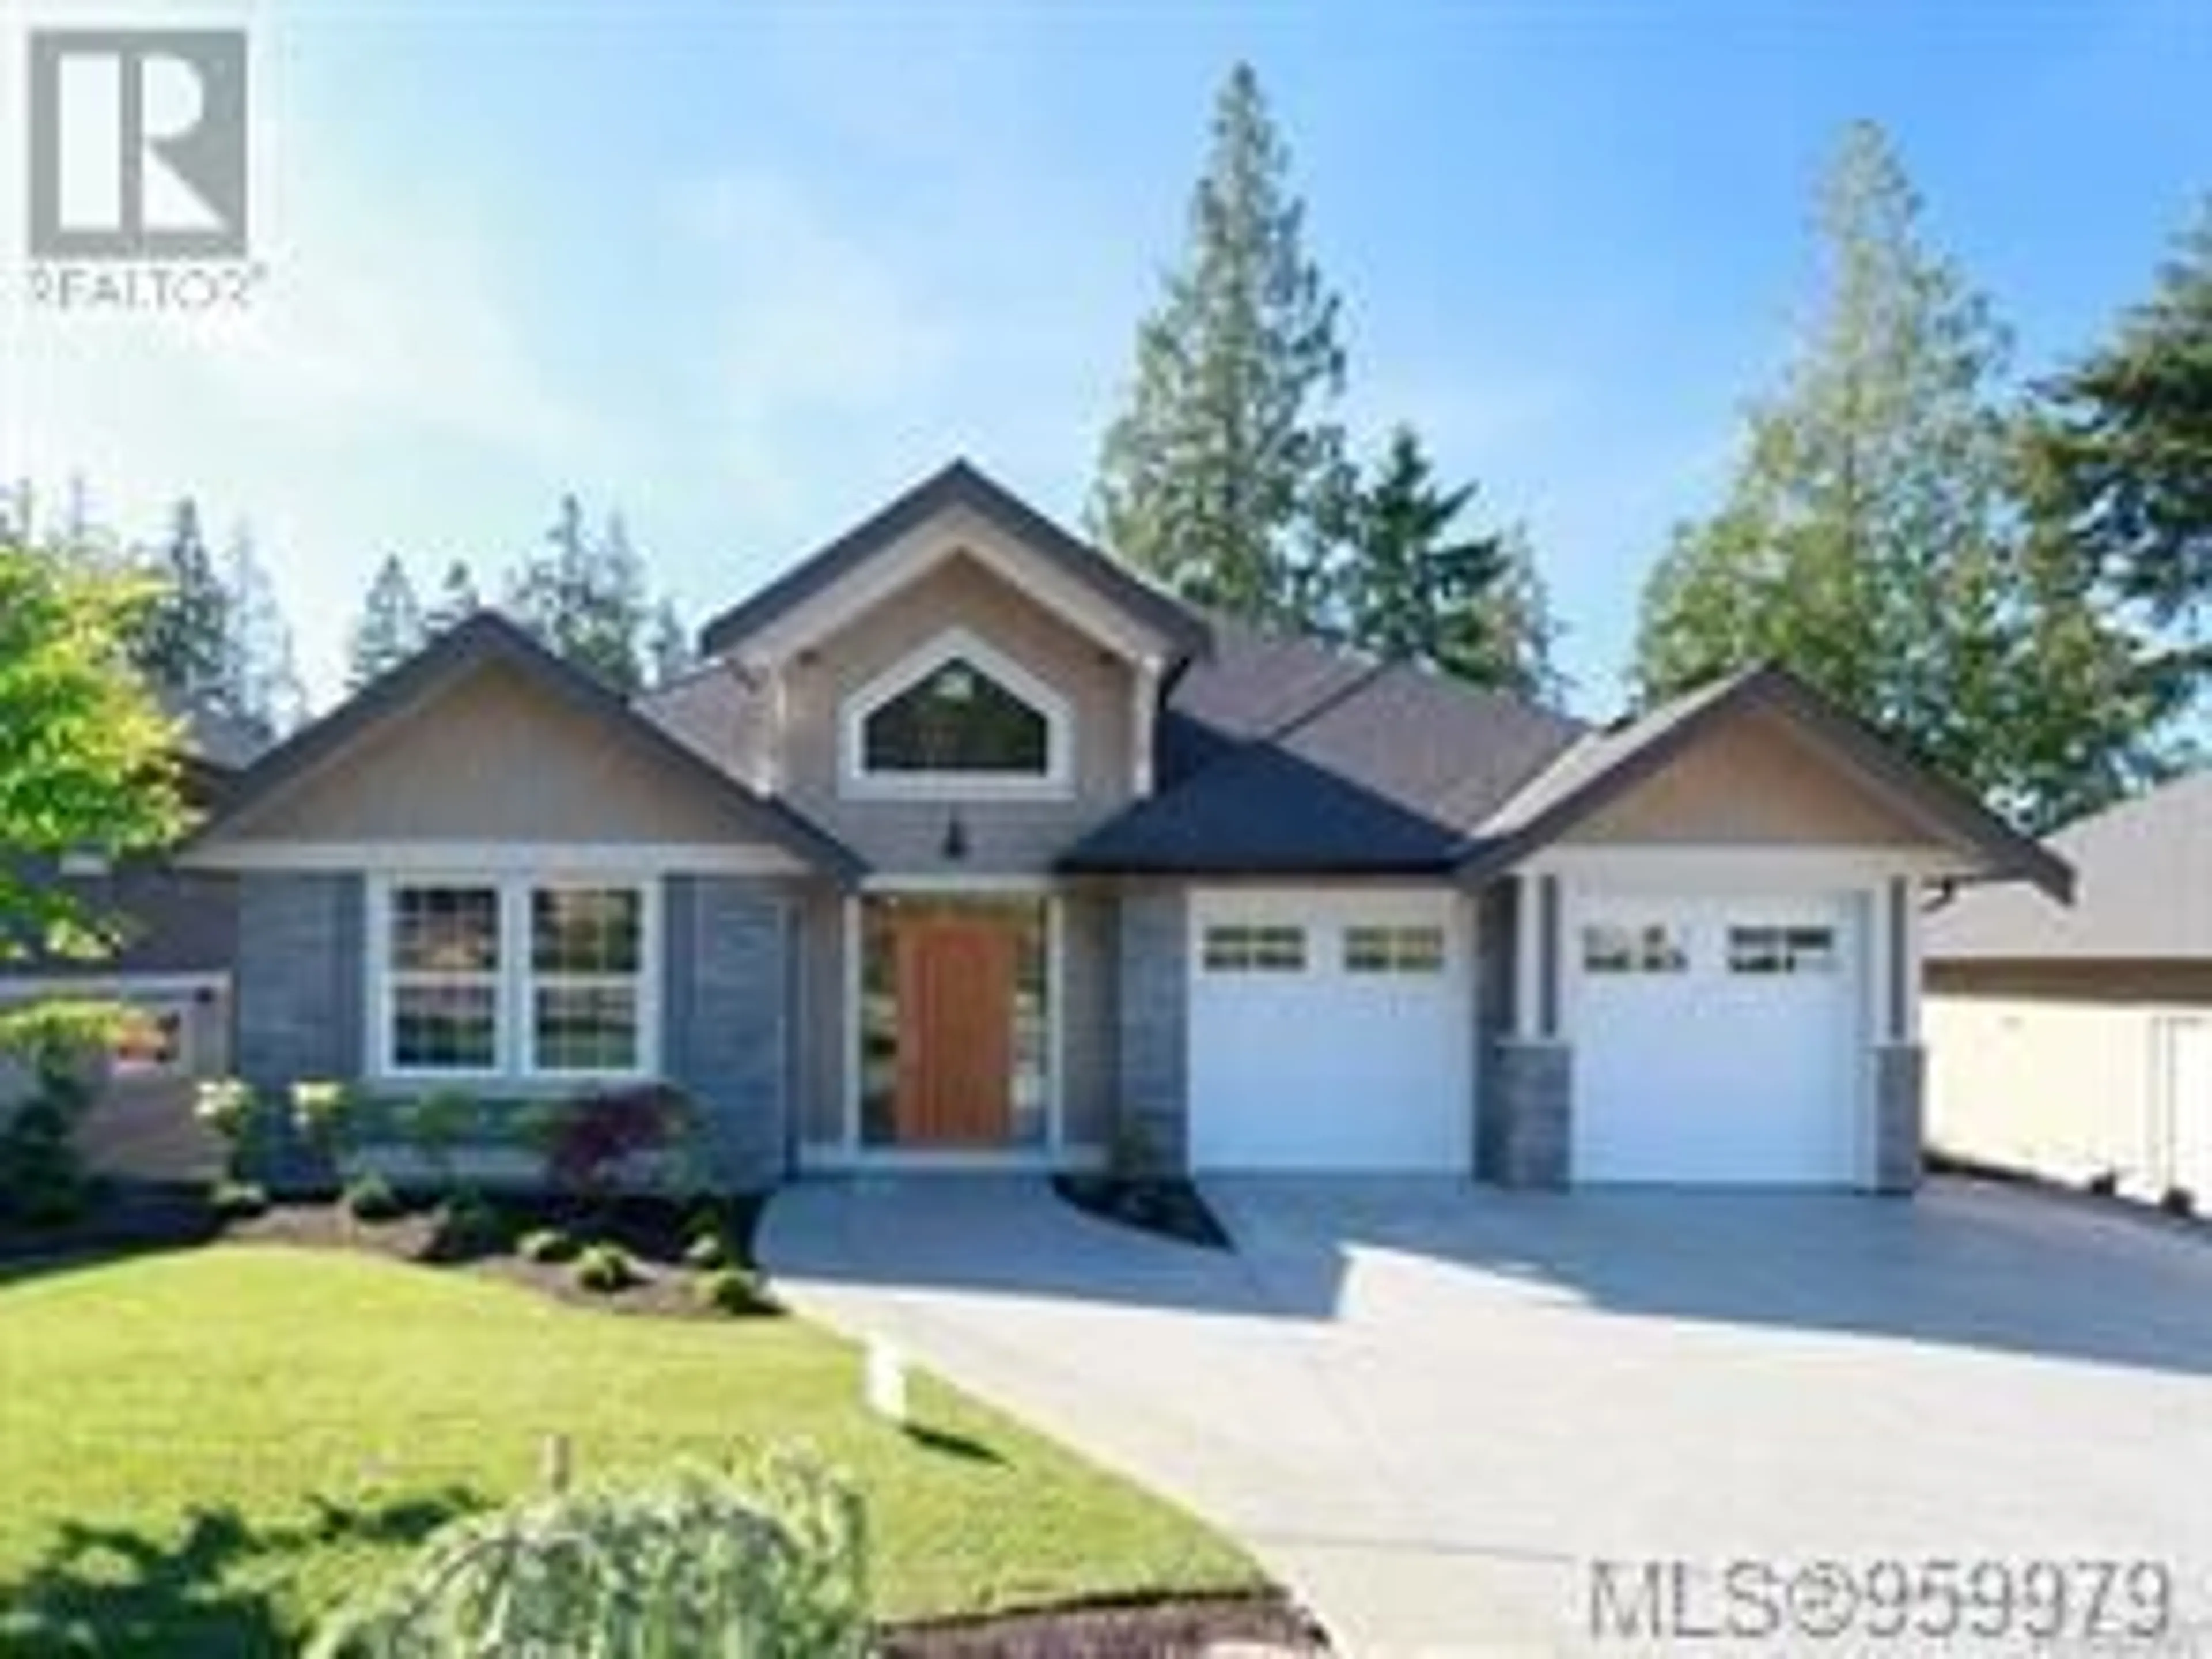 Home with brick exterior material for 2136 Champions Way, Langford British Columbia V9B0E3